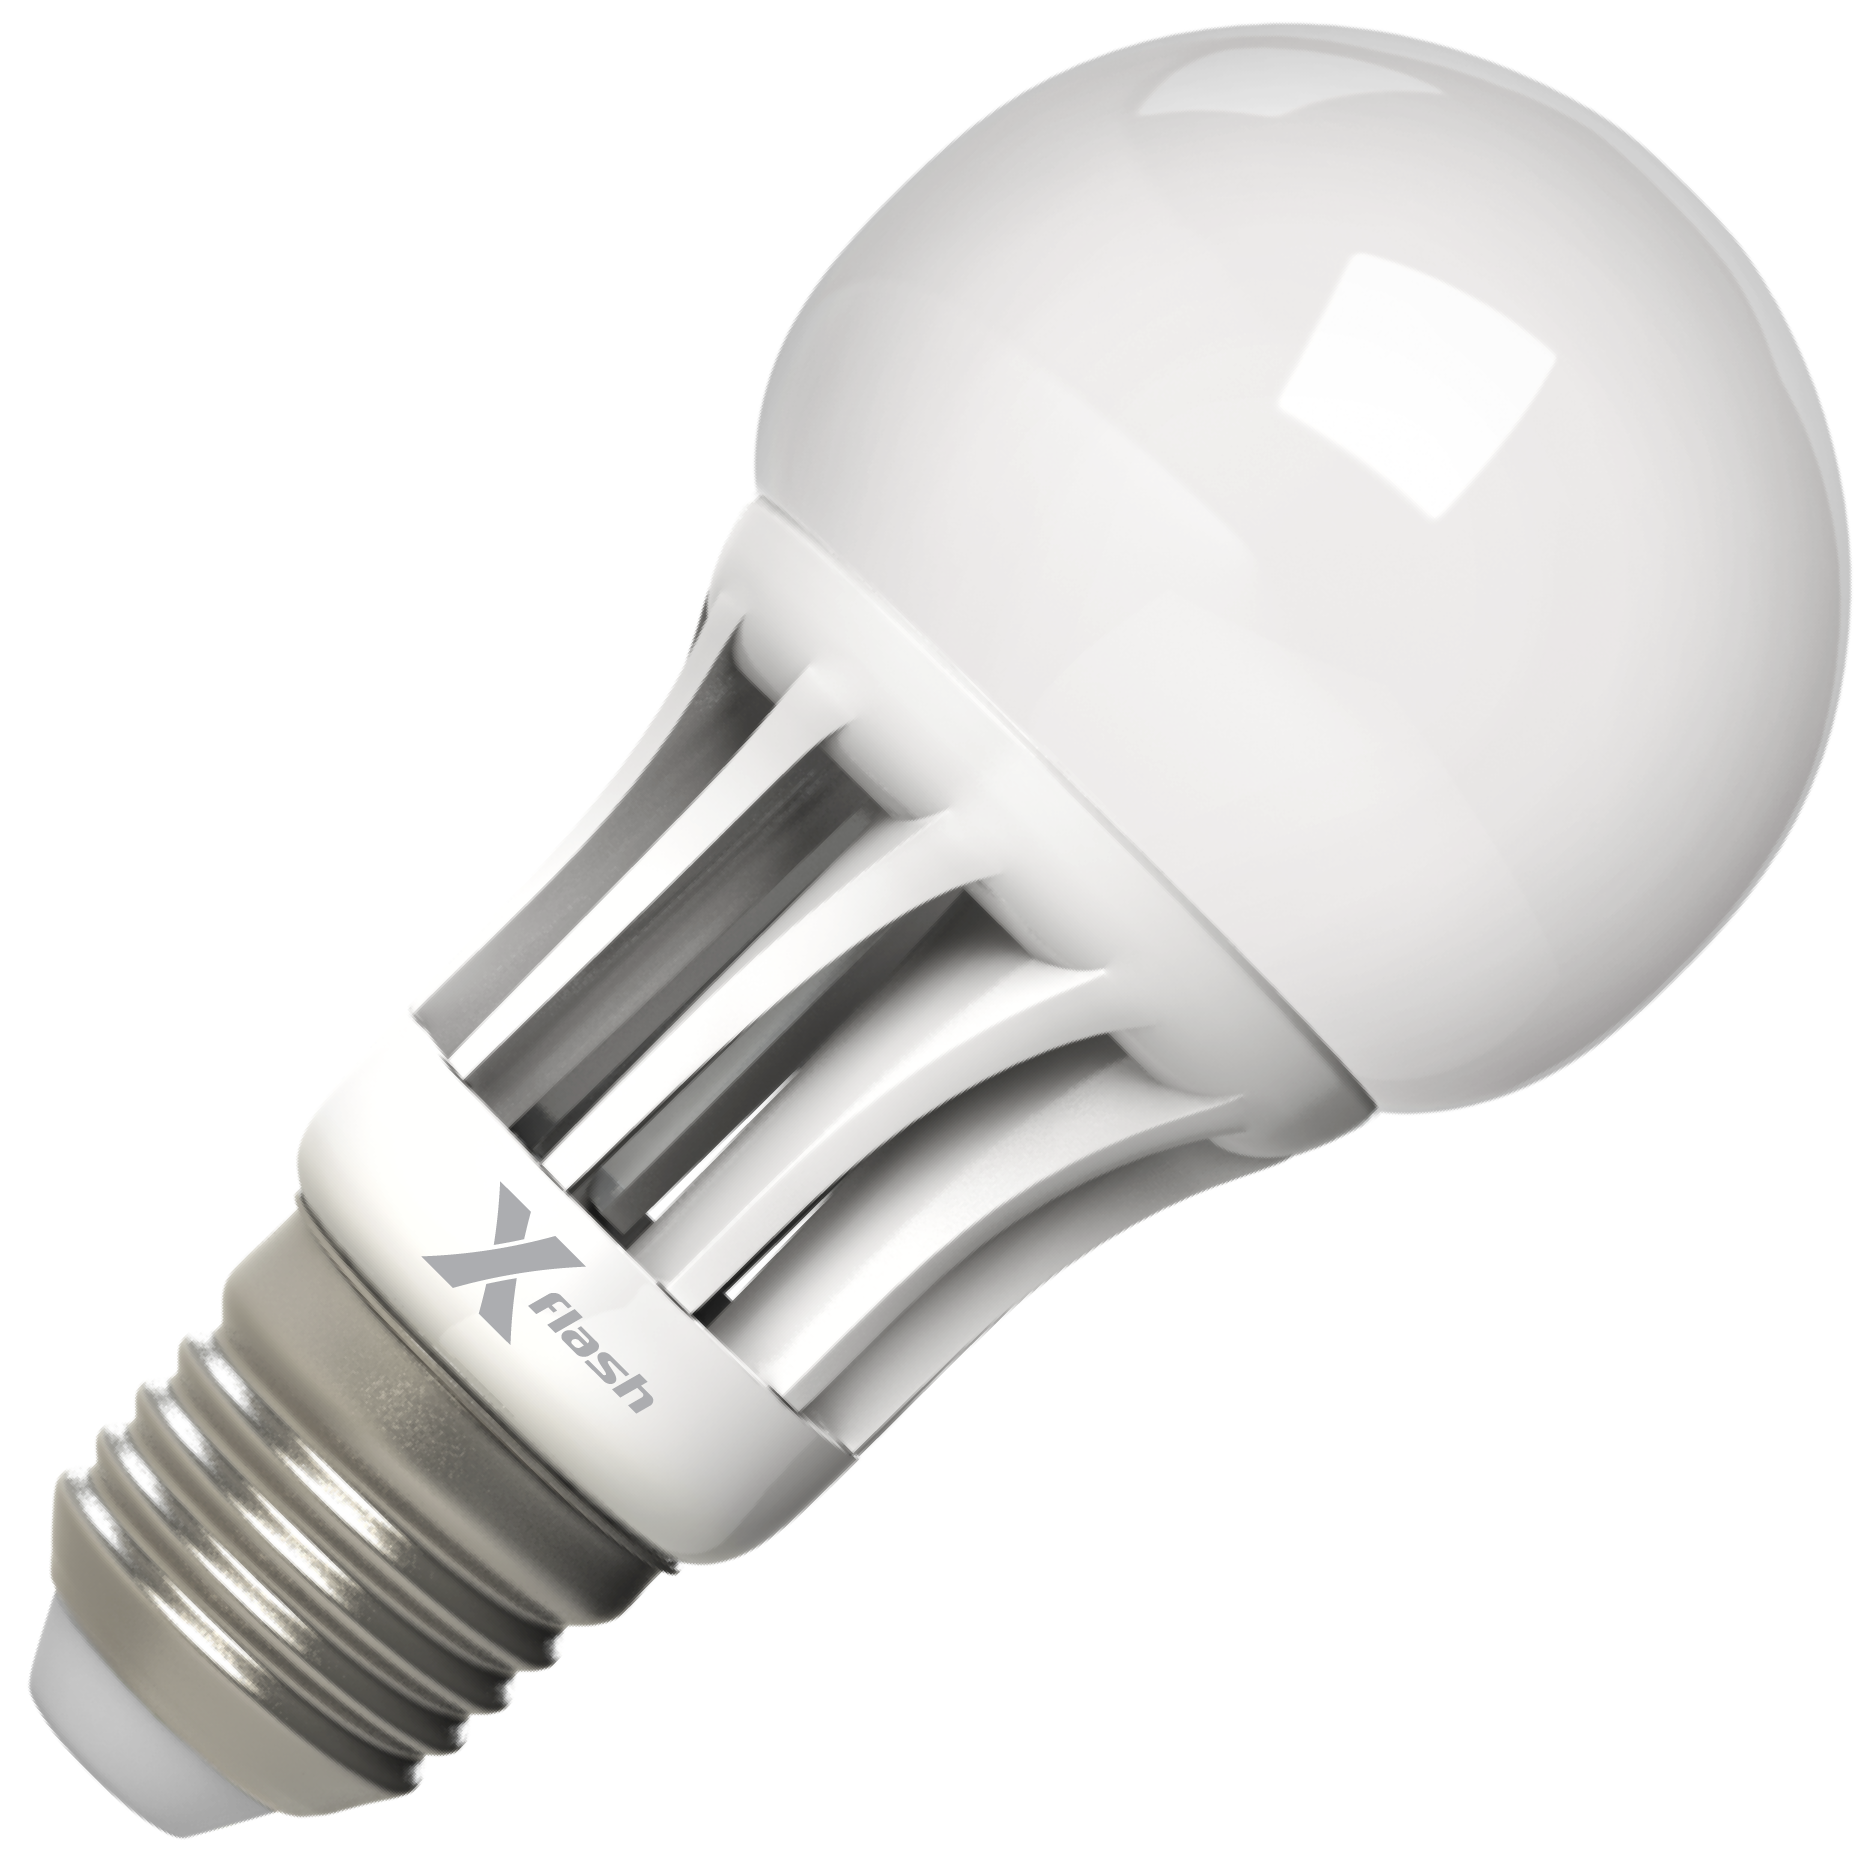 Bulb PNG images Download 